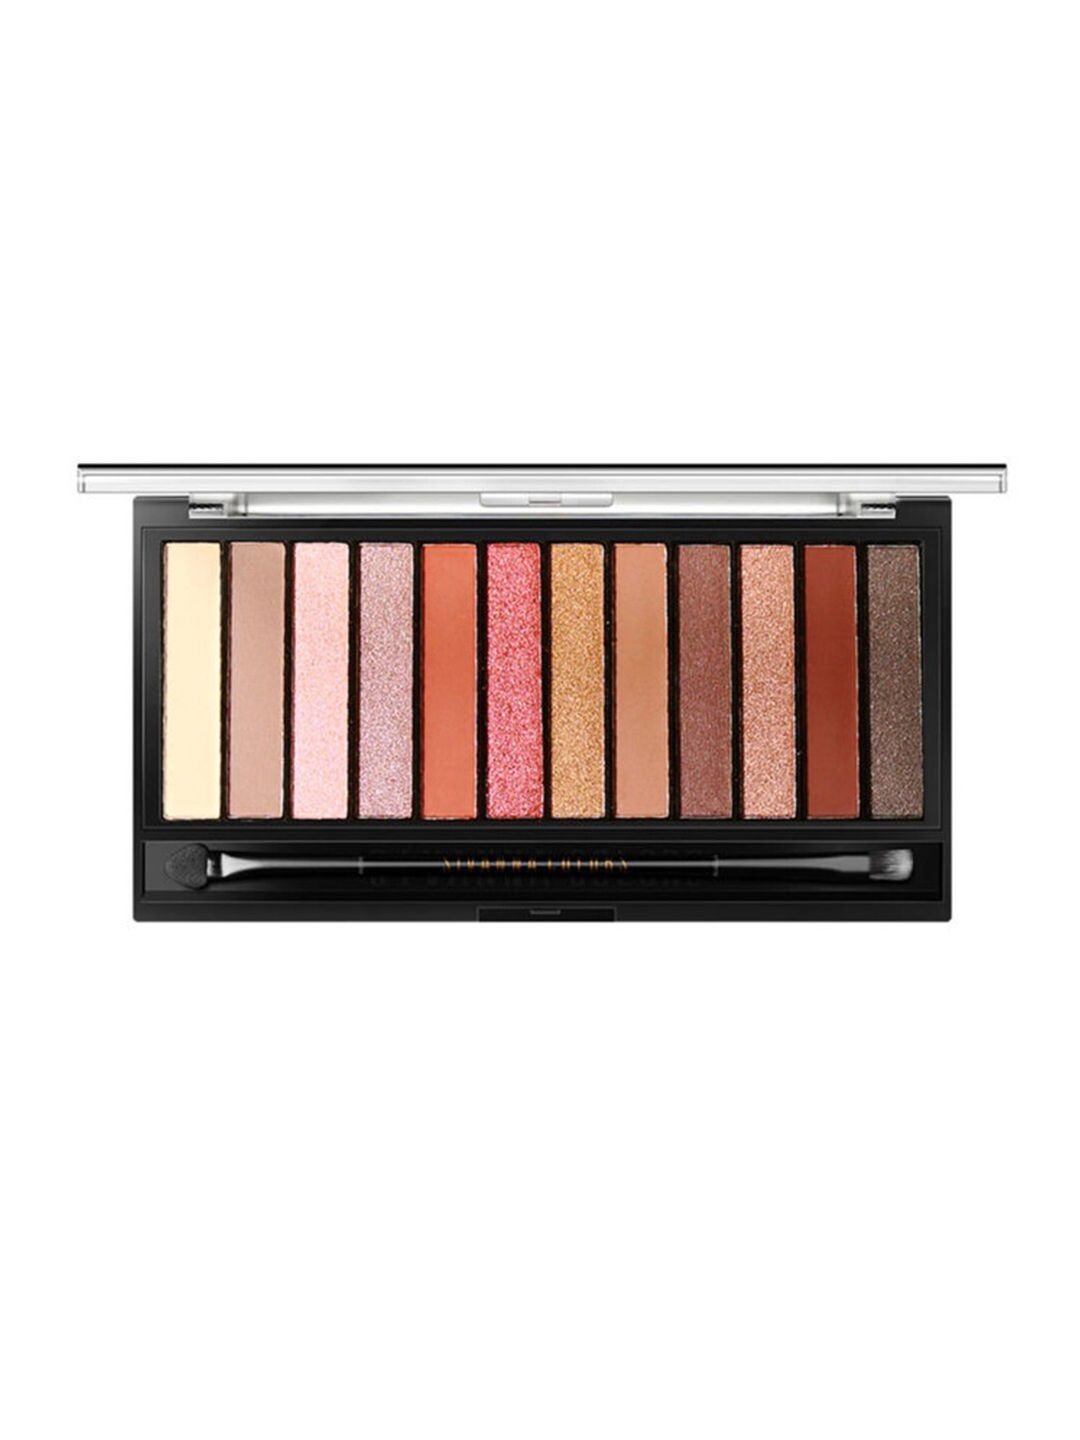 Sivanna Colors Make Up Studio Deluxe Eyeshadow Palette - HF202 03 Price in India